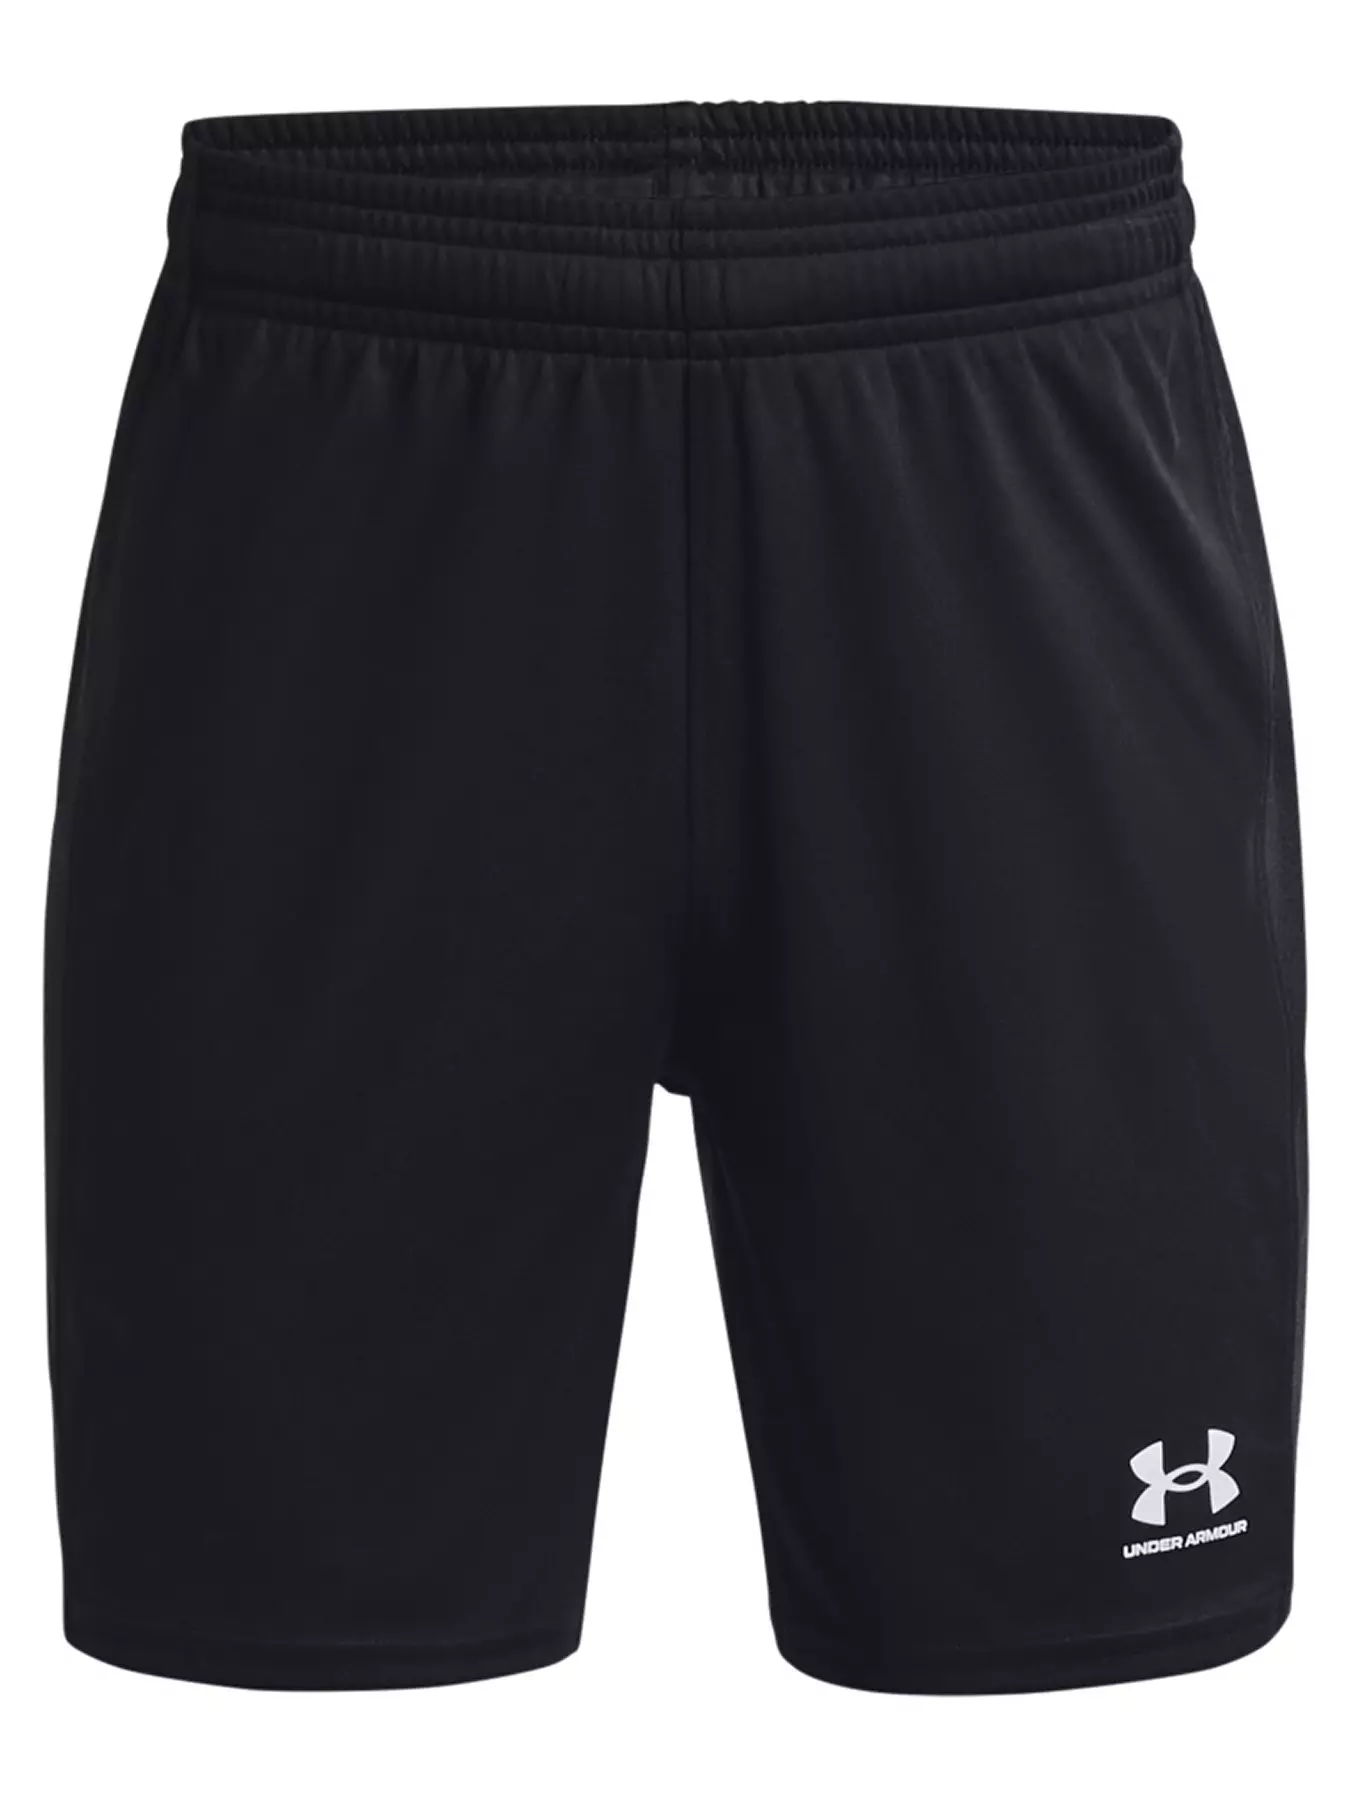 UNDER ARMOUR Boys Challenger Knit Shorts - Navy